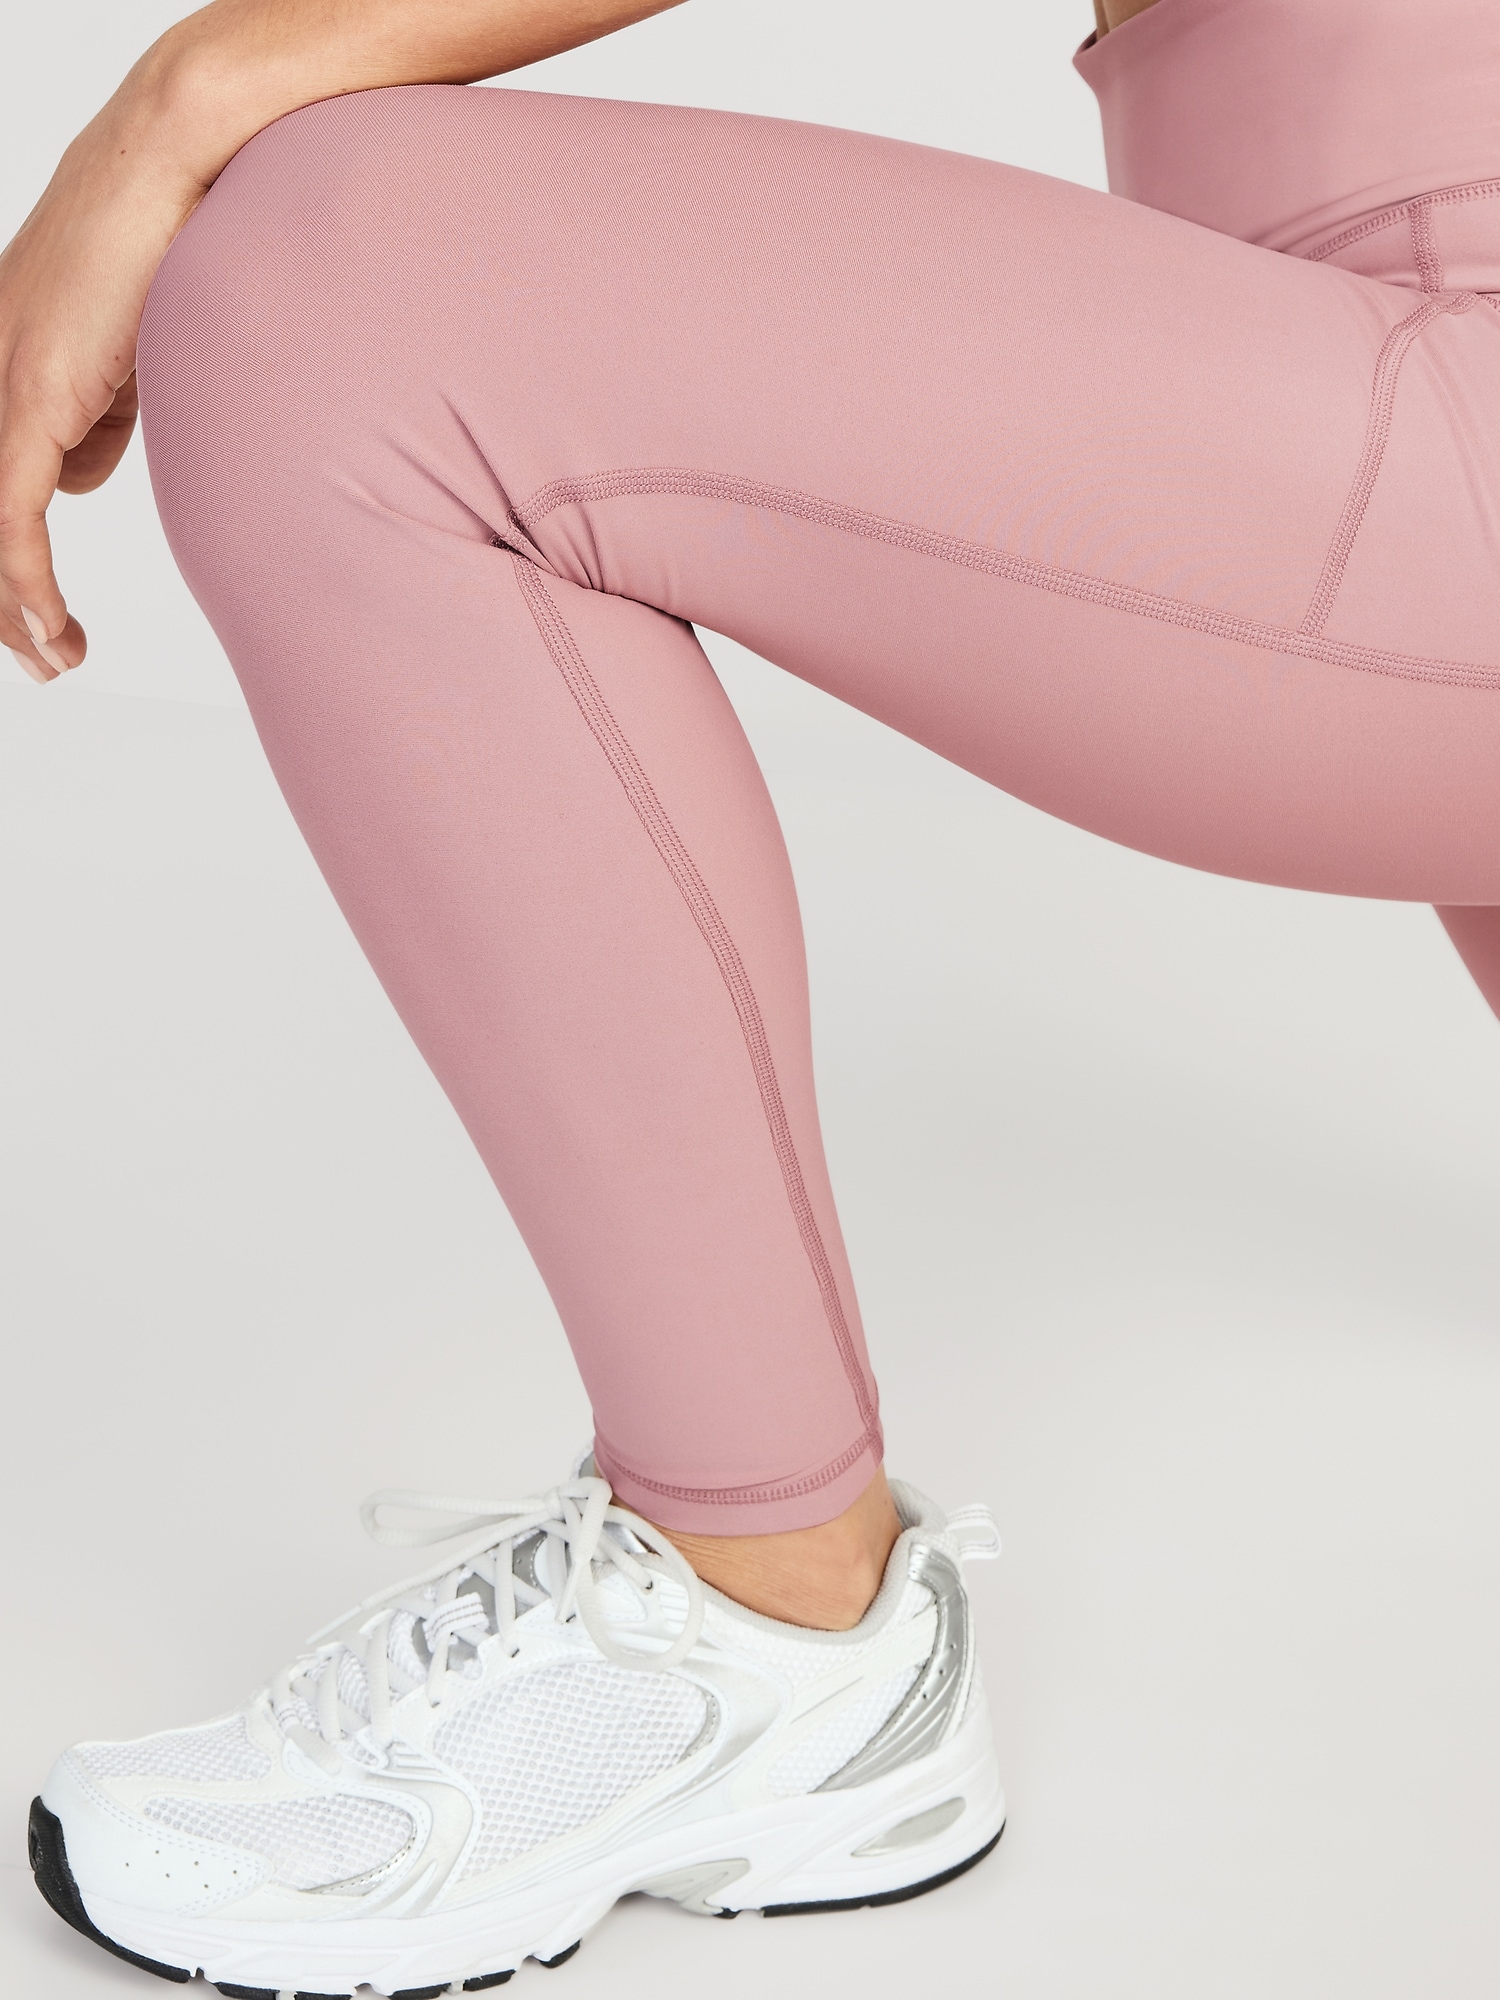 Lululemon Pink Leggings- Size 4 (Inseam 24.5”) – The Saved Collection